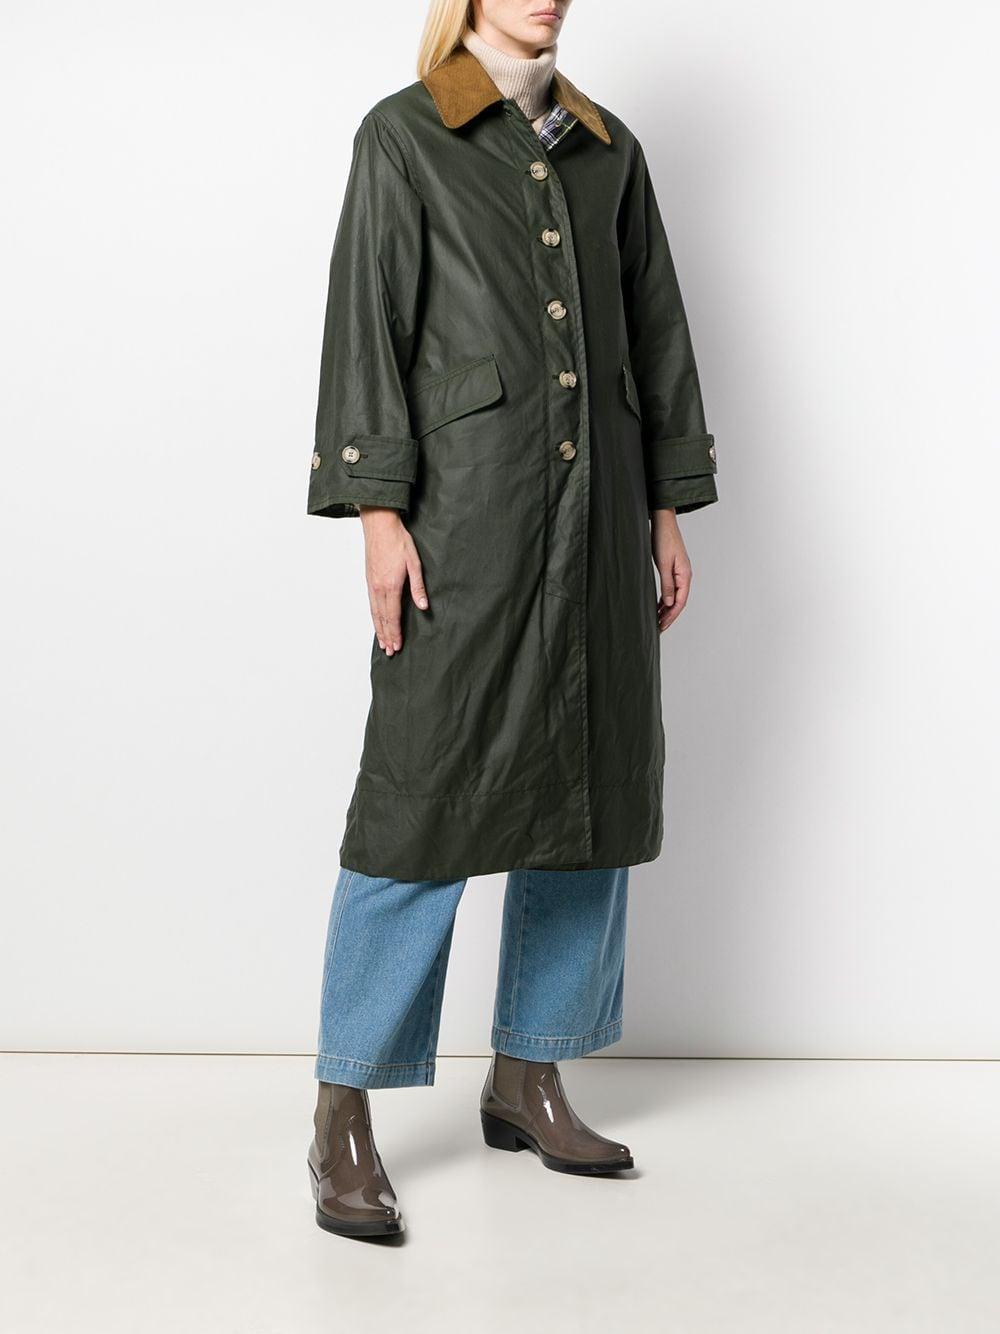 Barbour X Alexa Chung Maisie Waxed Coat in Green - Lyst